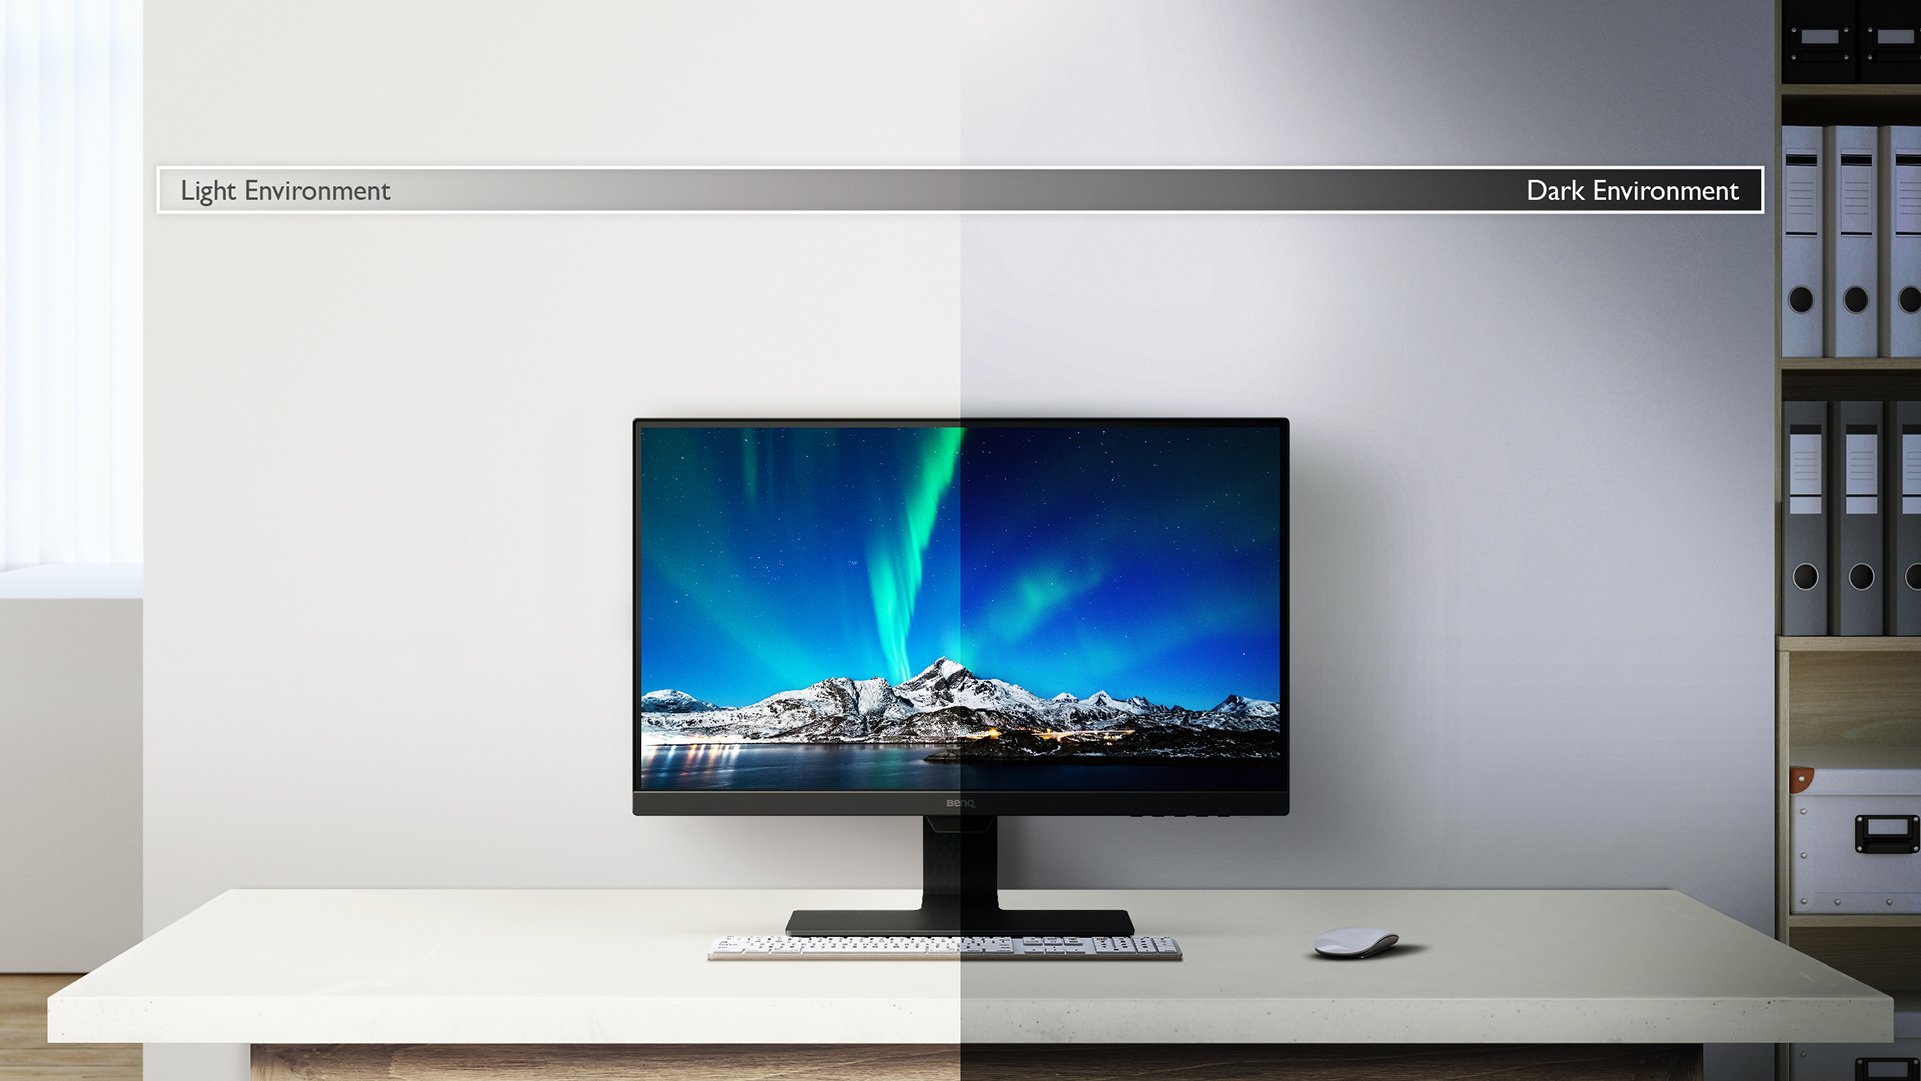 BenQ BL2480 Brightness Intelligence actively adjusts screen brightness for comfortable viewing experiences.